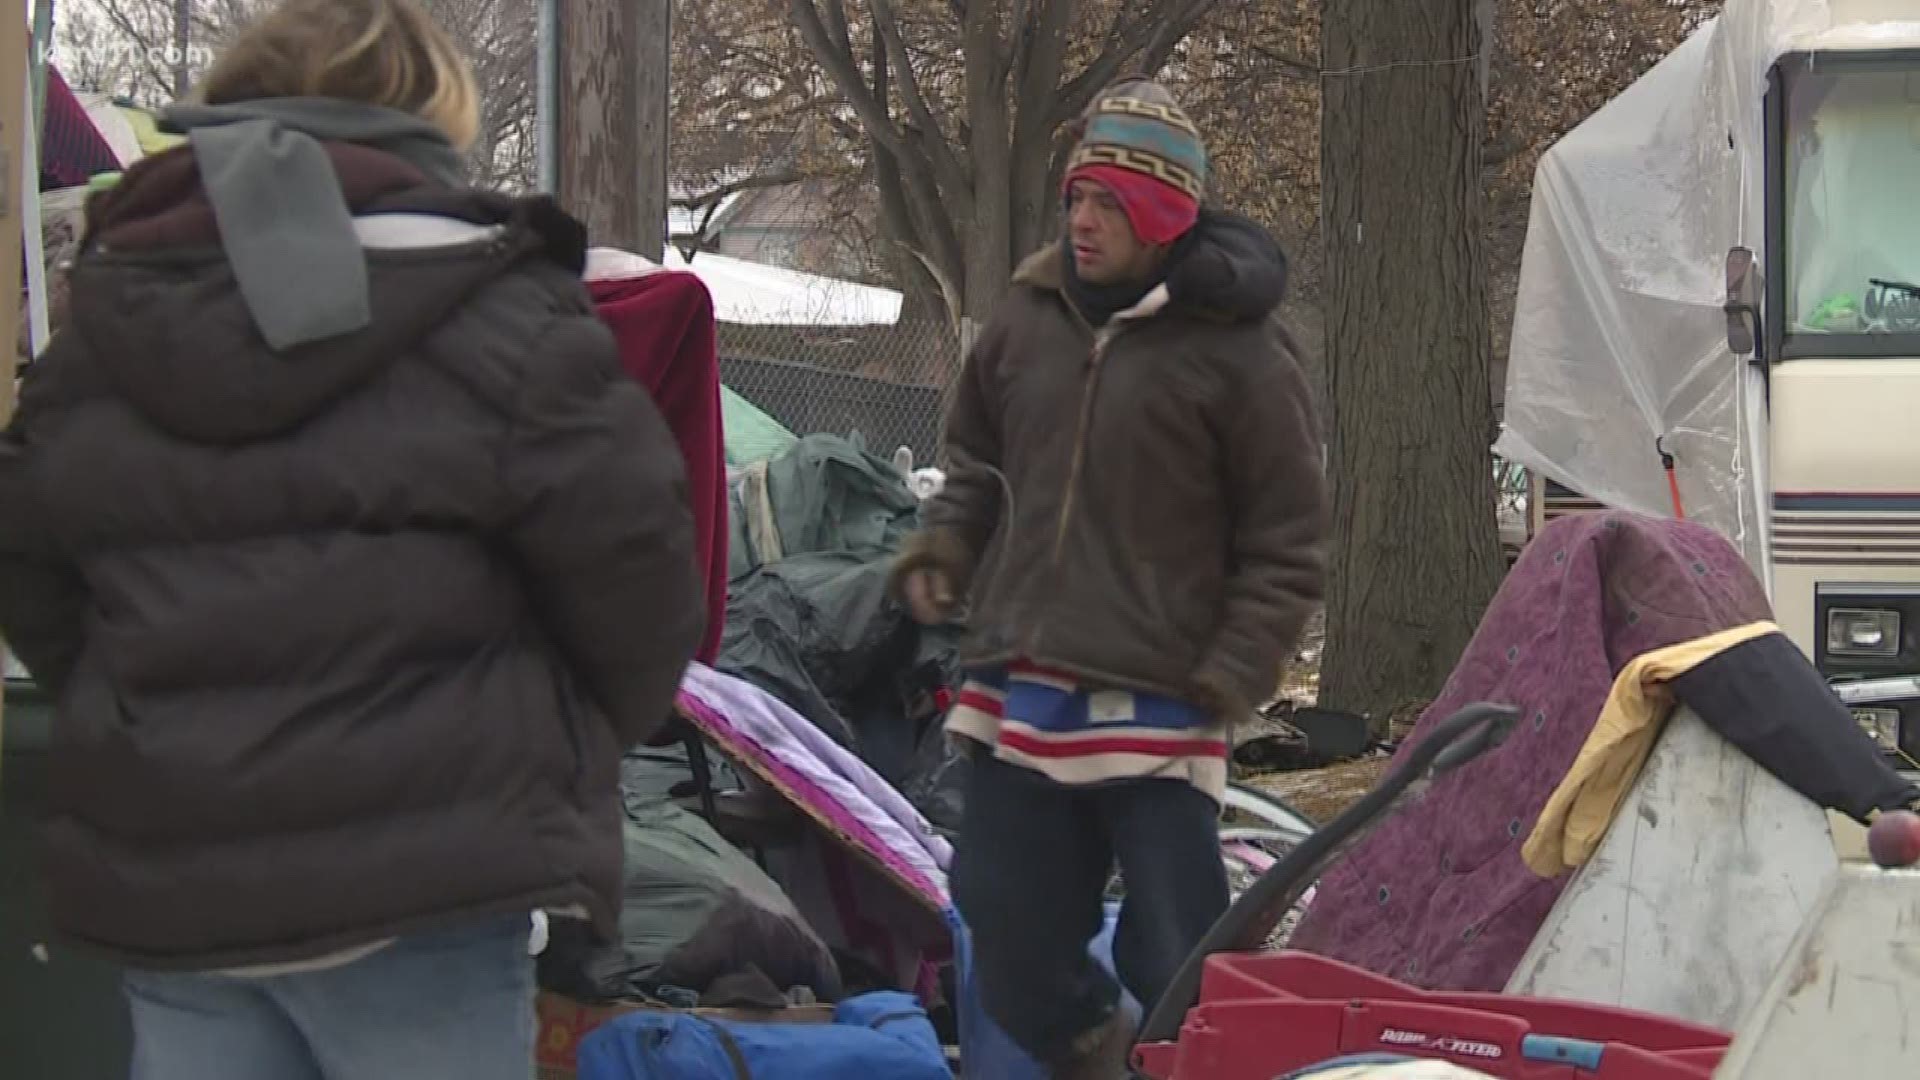 Kiya Edwards checks in with the mayor's office on what is being done for the people who are living in a homeless camp in Minneapolis.